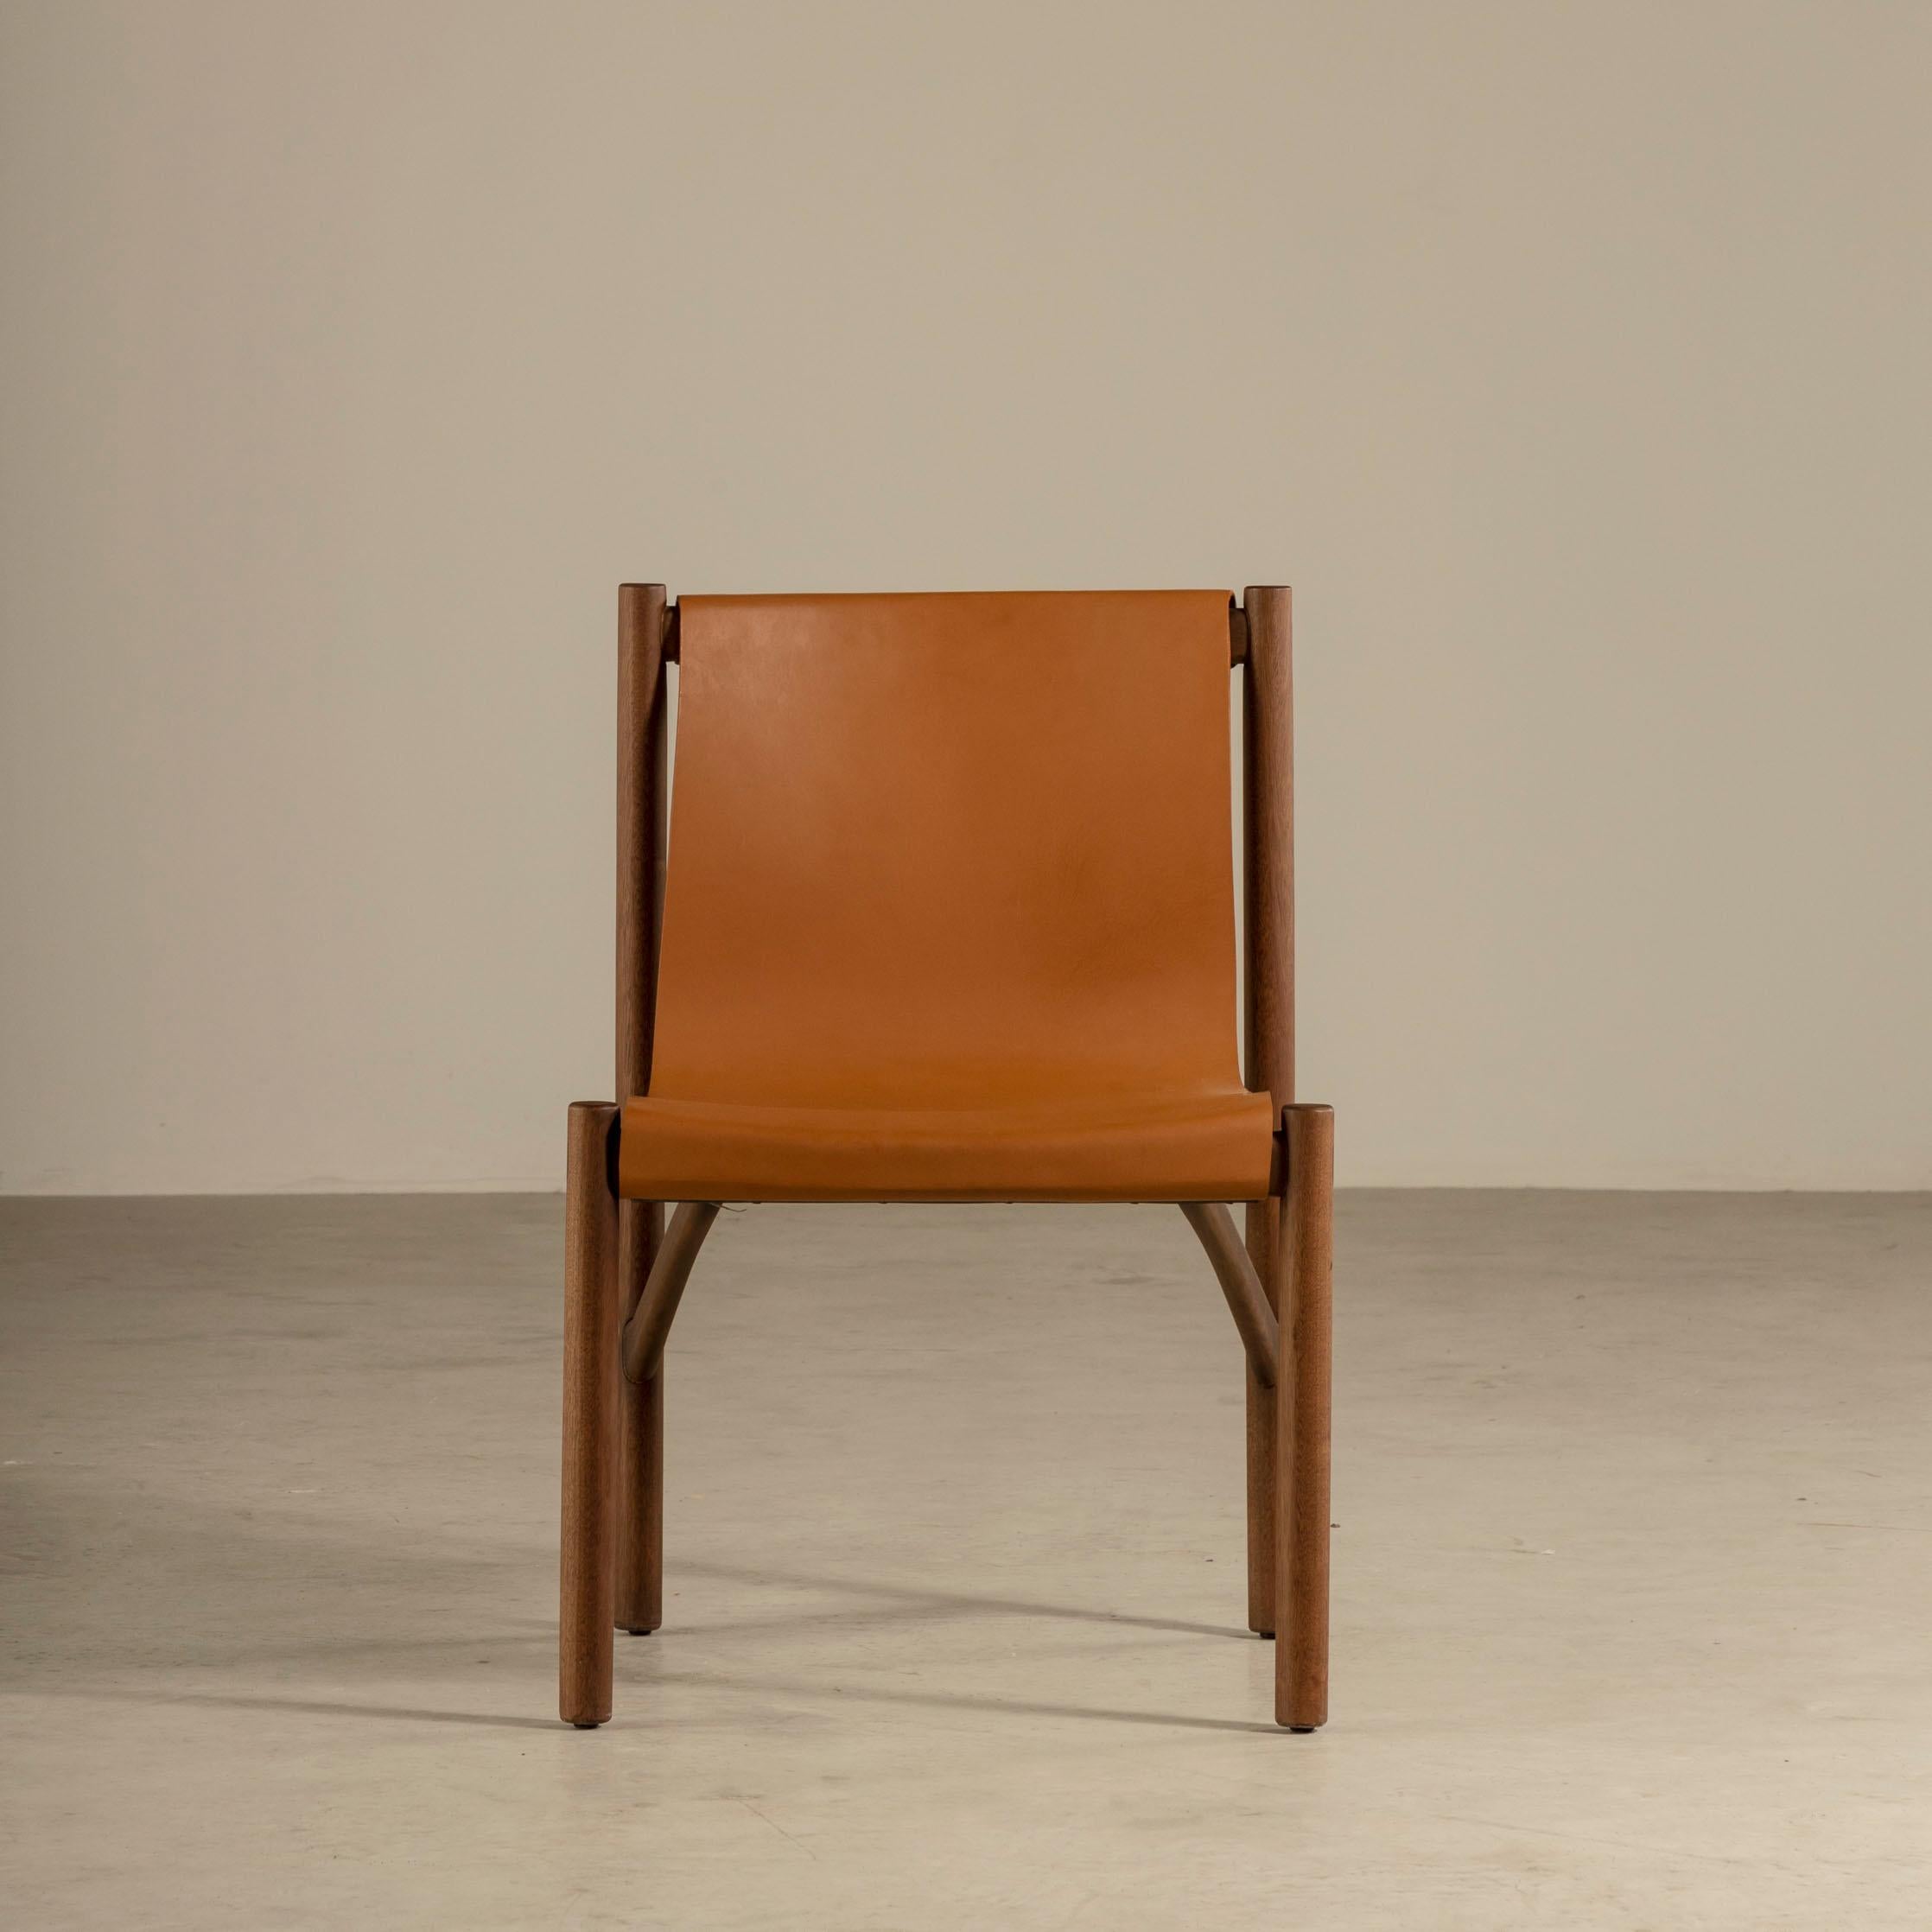 The Frevo chair is a stunning piece of furniture created by the Brazilian artist and designer Ronald Sasson in 2021. It reflects the unique vision and sharp eyes of its creator, showcasing a perfect blend of simplicity and sculptural lines that